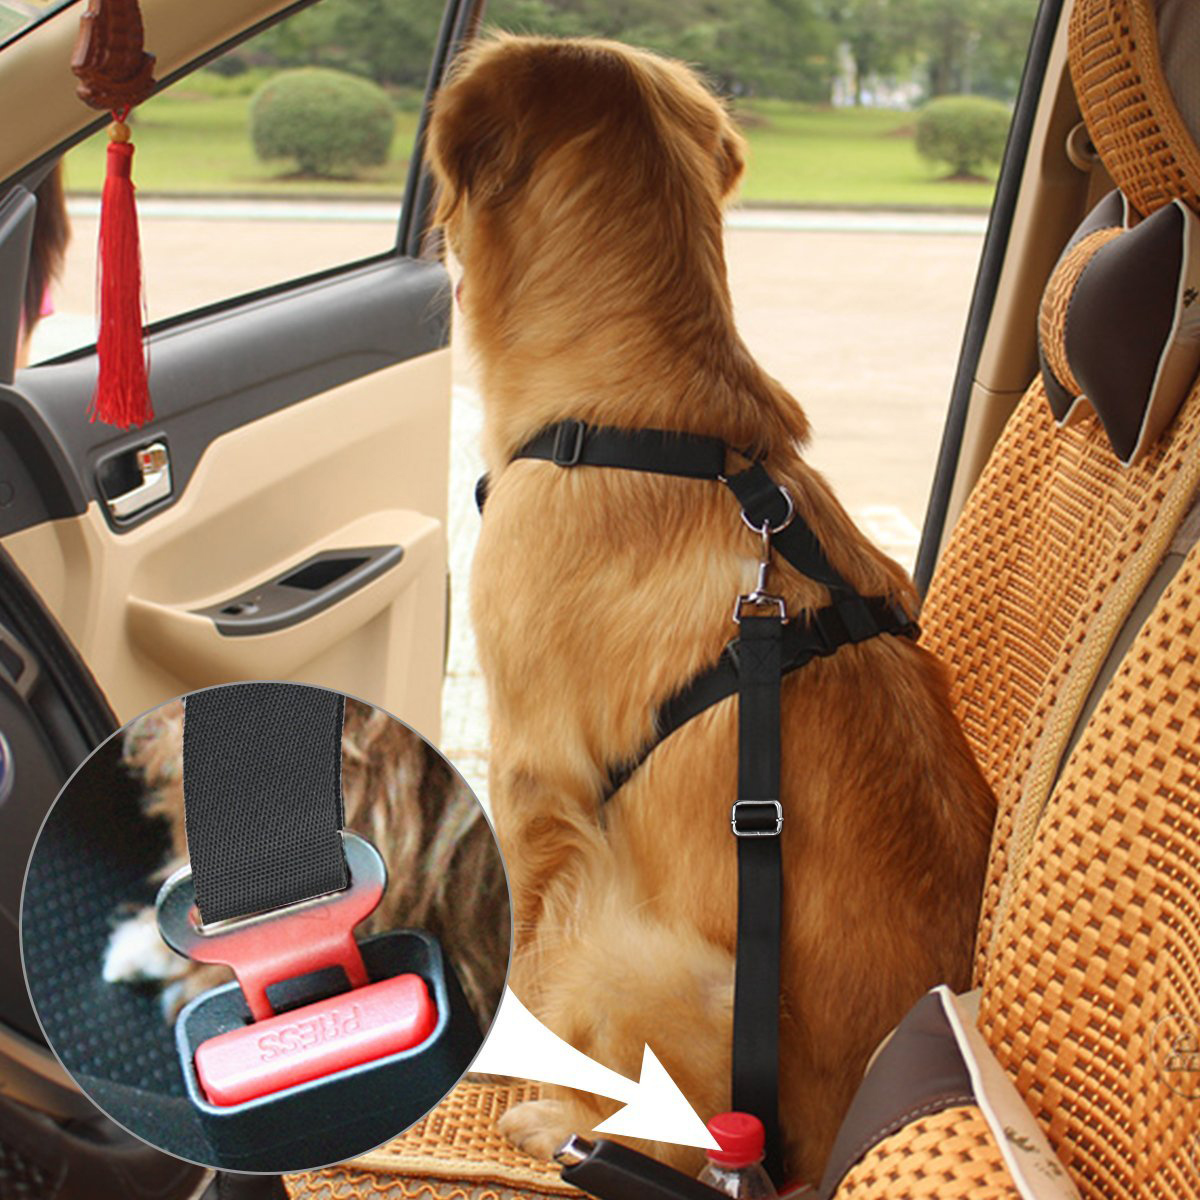 Buy VOOPET Dog Seat Belt 2 Packs Adjustable Heavy Duty & Elastic Pet Car Seat  Belt Safety Leads Vehicle Nylon Seatbelt Harness Pet Leash for Travel and  Daily Use Online in Vietnam.